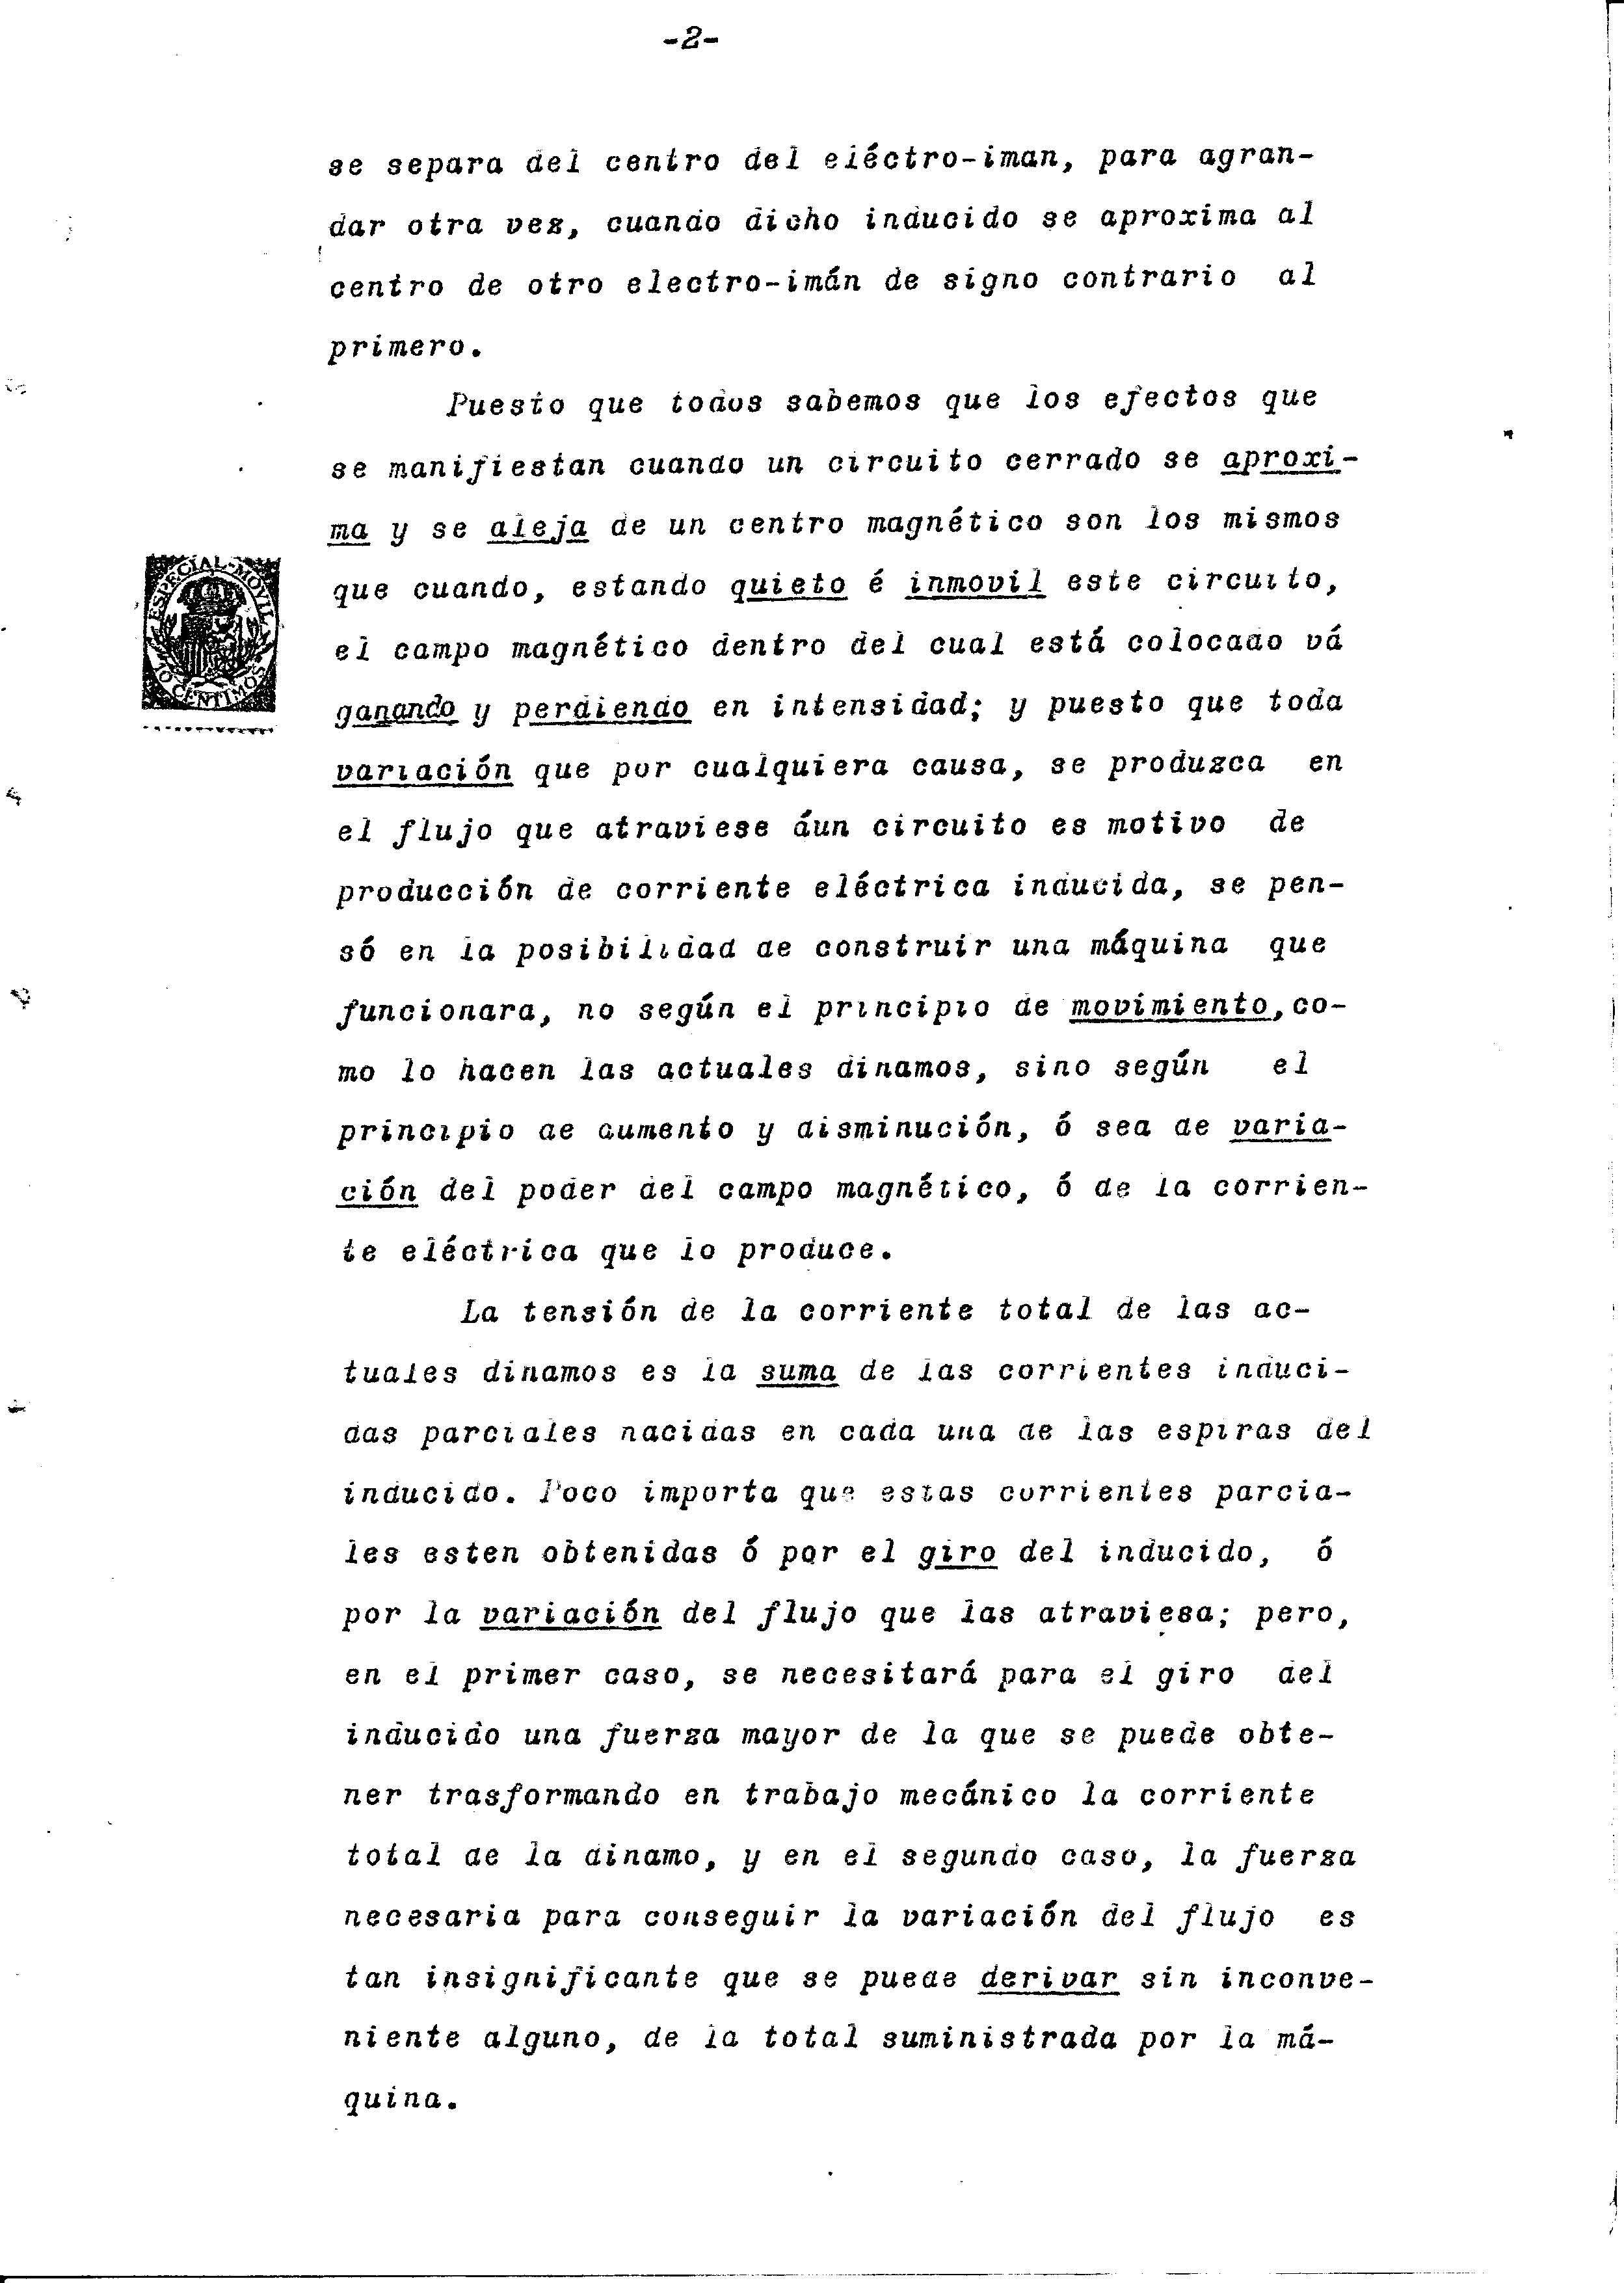 Clemente Figuera Patente 1908_Num_44267_scanned_OCR_Page_03.jpg